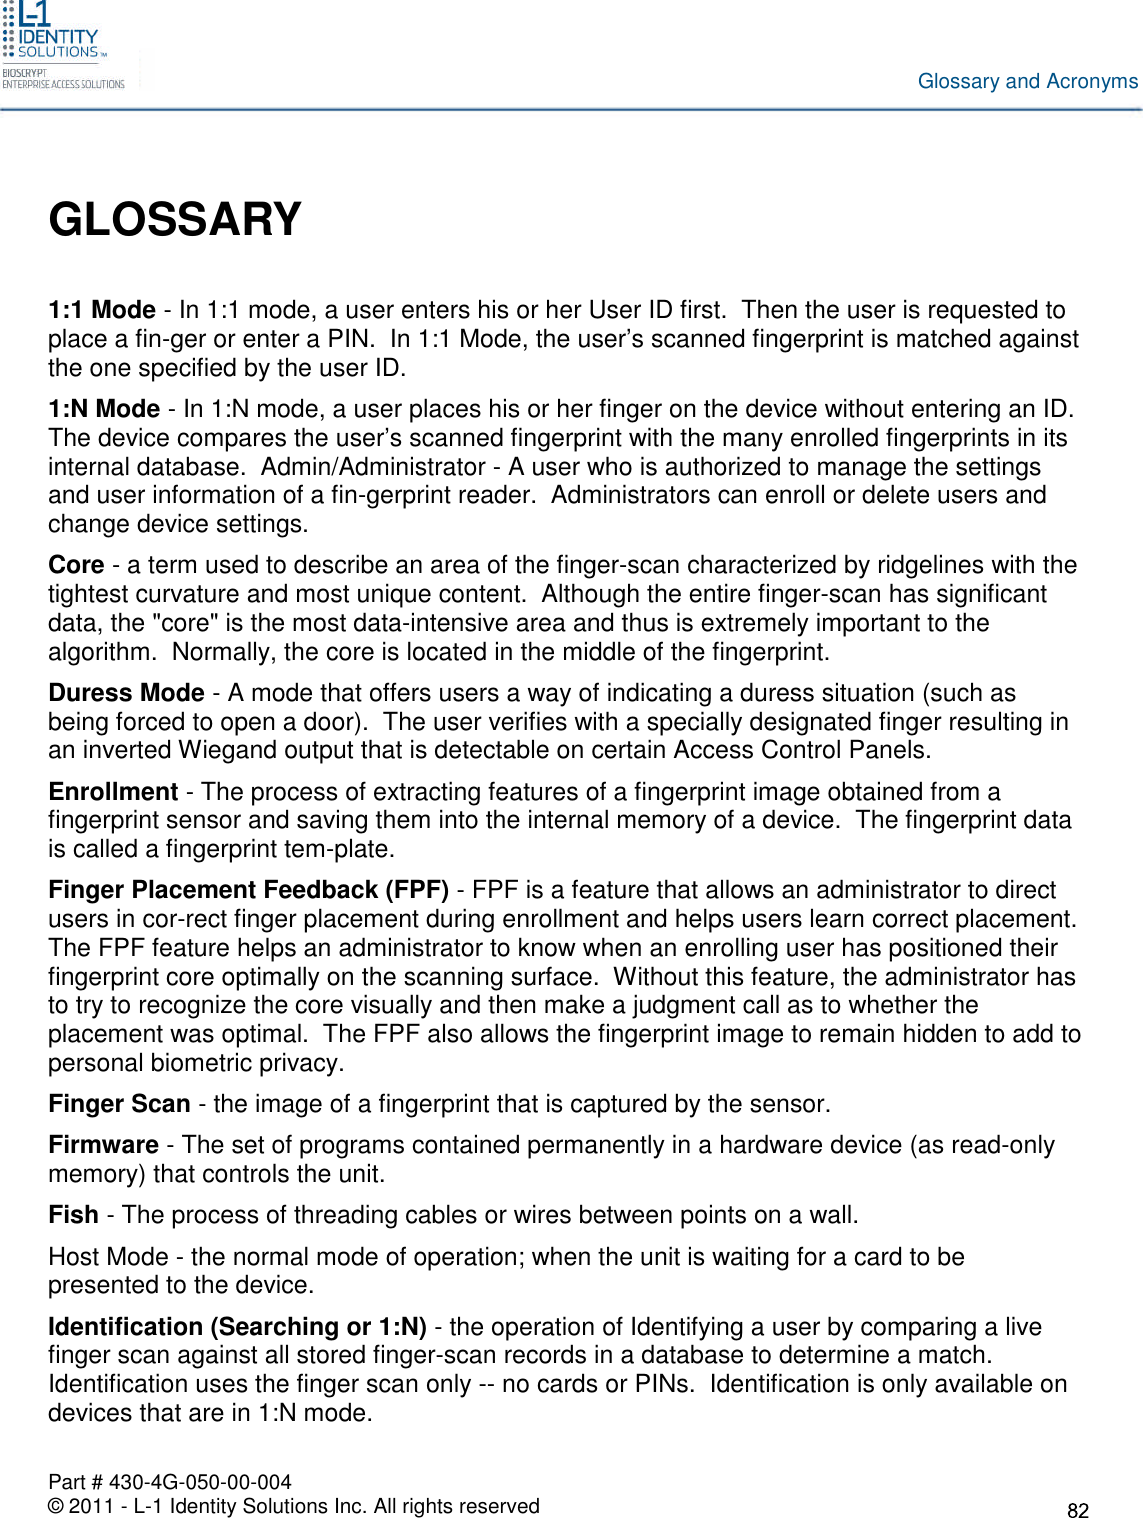 Part # 430-4G-050-00-004© 2011 - L-1 Identity Solutions Inc. All rights reservedGlossary and AcronymsGLOSSARY1:1 Mode - In 1:1 mode, a user enters his or her User ID first. Then the user is requested toplace a fin-ger or enter a PIN. In 1:1 Mode, the user’s scanned fingerprint is matched againstthe one specified by the user ID.1:N Mode - In 1:N mode, a user places his or her finger on the device without entering an ID.The device compares the user’s scanned fingerprint with the many enrolled fingerprints in itsinternal database. Admin/Administrator - A user who is authorized to manage the settingsand user information of a fin-gerprint reader. Administrators can enroll or delete users andchange device settings.Core - a term used to describe an area of the finger-scan characterized by ridgelines with thetightest curvature and most unique content. Although the entire finger-scan has significantdata, the &quot;core&quot; is the most data-intensive area and thus is extremely important to thealgorithm. Normally, the core is located in the middle of the fingerprint.Duress Mode - A mode that offers users a way of indicating a duress situation (such asbeing forced to open a door). The user verifies with a specially designated finger resulting inan inverted Wiegand output that is detectable on certain Access Control Panels.Enrollment - The process of extracting features of a fingerprint image obtained from afingerprint sensor and saving them into the internal memory of a device. The fingerprint datais called a fingerprint tem-plate.Finger Placement Feedback (FPF) - FPF is a feature that allows an administrator to directusers in cor-rect finger placement during enrollment and helps users learn correct placement.The FPF feature helps an administrator to know when an enrolling user has positioned theirfingerprint core optimally on the scanning surface. Without this feature, the administrator hasto try to recognize the core visually and then make a judgment call as to whether theplacement was optimal. The FPF also allows the fingerprint image to remain hidden to add topersonal biometric privacy.Finger Scan - the image of a fingerprint that is captured by the sensor.Firmware - The set of programs contained permanently in a hardware device (as read-onlymemory) that controls the unit.Fish - The process of threading cables or wires between points on a wall.Host Mode - the normal mode of operation; when the unit is waiting for a card to bepresented to the device.Identification (Searching or 1:N) - the operation of Identifying a user by comparing a livefinger scan against all stored finger-scan records in a database to determine a match.Identification uses the finger scan only -- no cards or PINs. Identification is only available ondevices that are in 1:N mode.